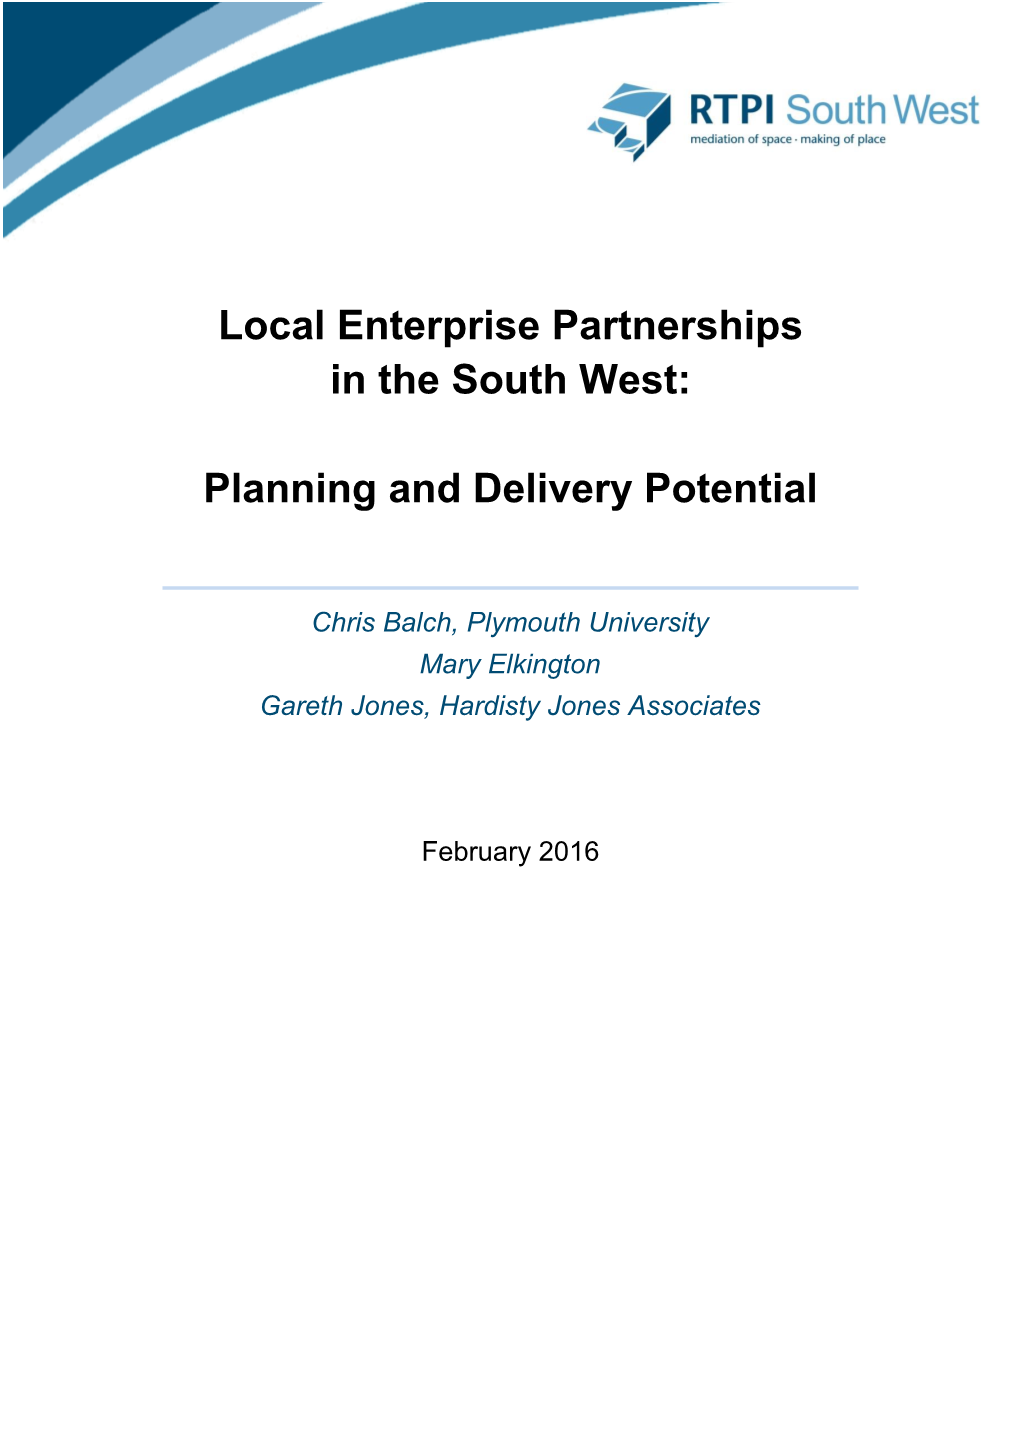 Local Enterprise Partnerships in the South West